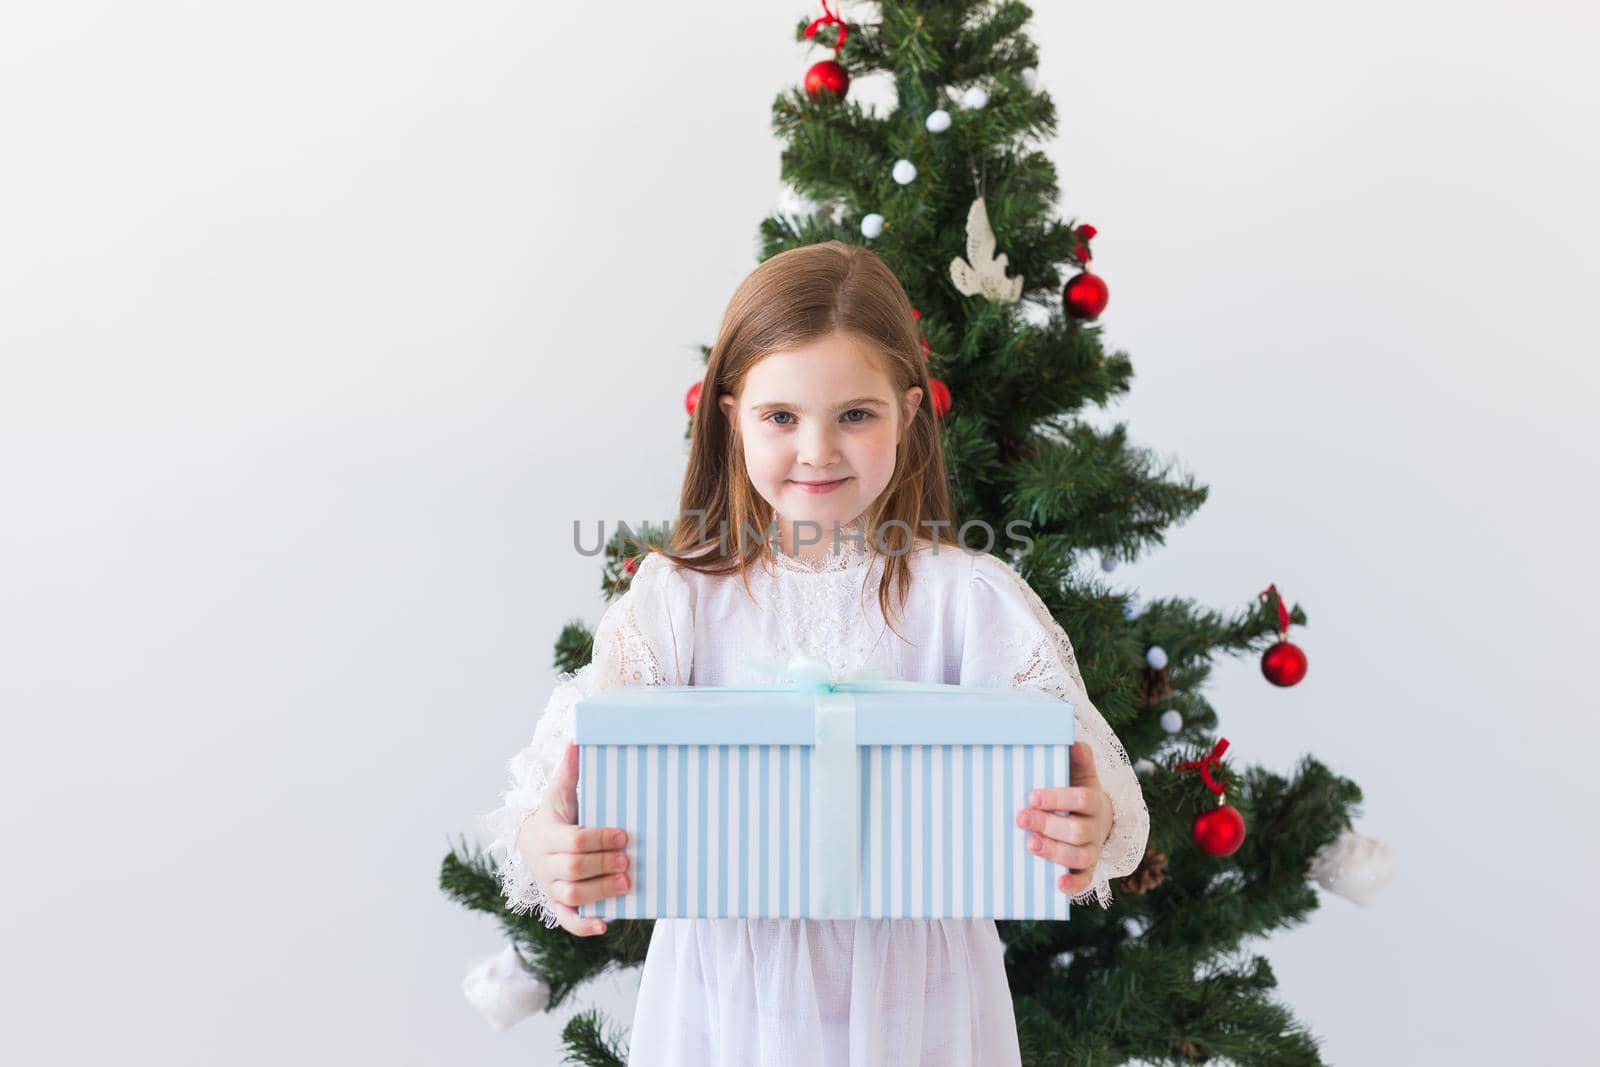 Child girl with gift box near Christmas tree. Holidays, christmas time and presents concept